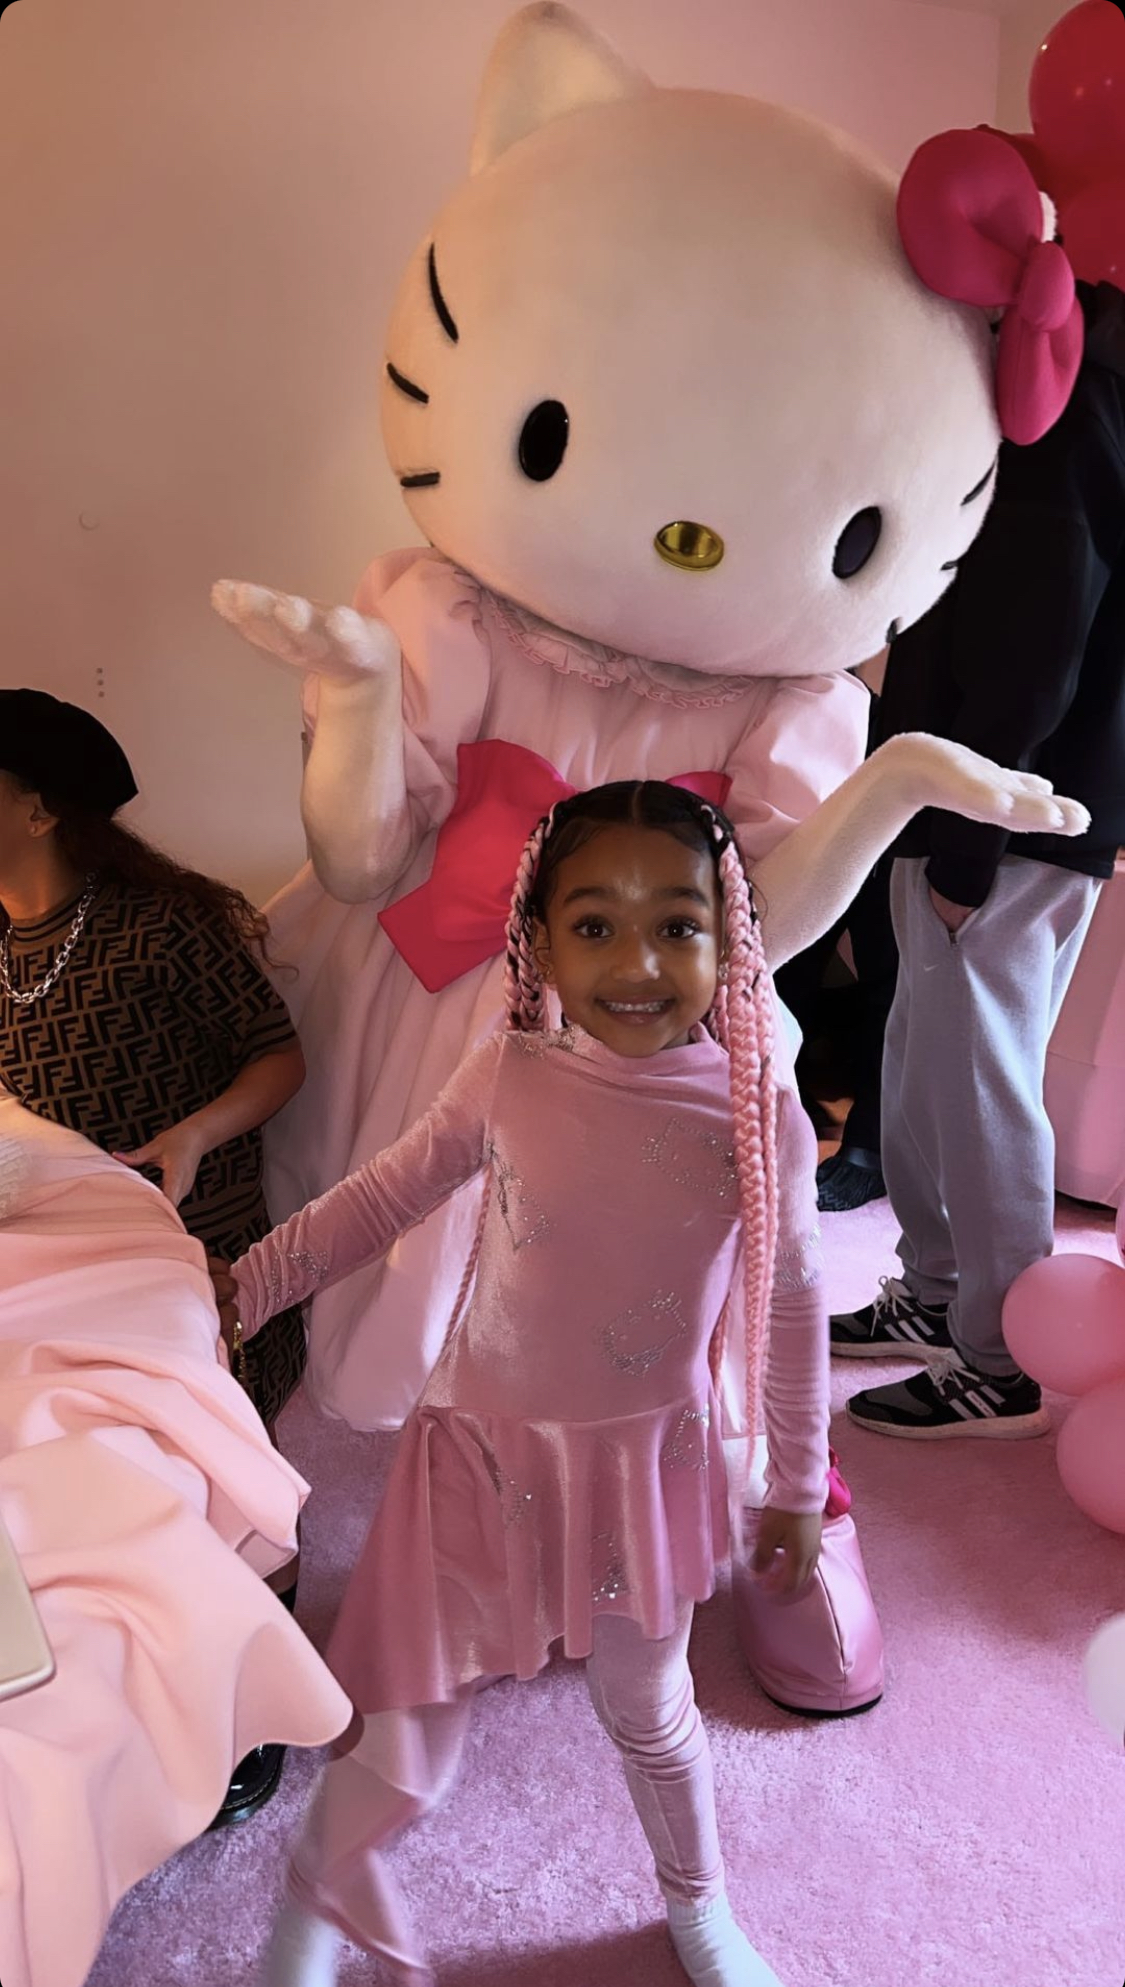 likhoa kim kardashian shared photos of her daughter chicago west s luxurious pink and hello kitty themed birthday party 6532a02047ce8 Kim Kardashian Shared Photos Of Her Daughter Chicago West's Luxurious Pink And Hello Kitty-themed Birthday Party